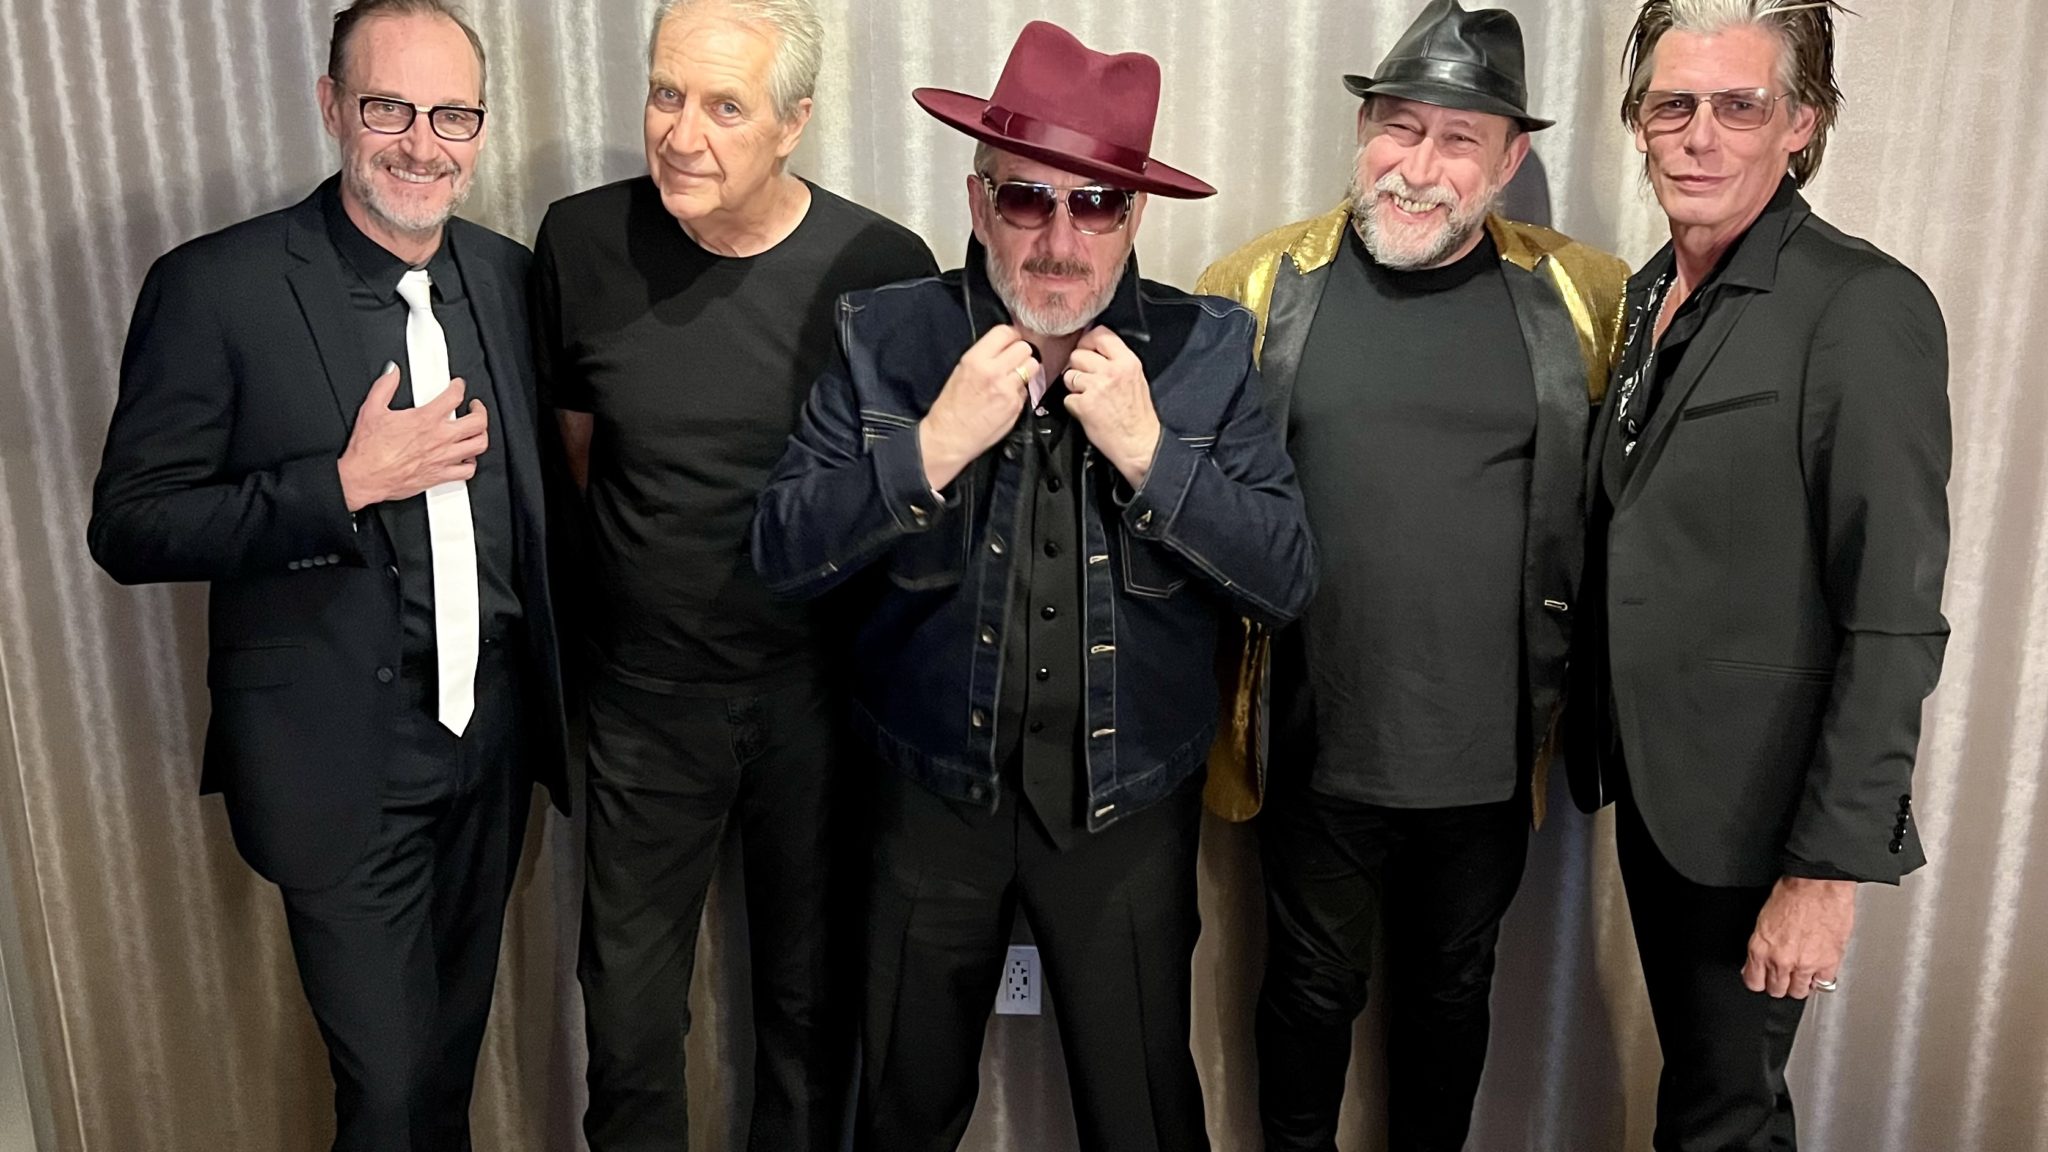 Elvis Costello And The Imposters headed out on 2022 UK Tour RETROPOP